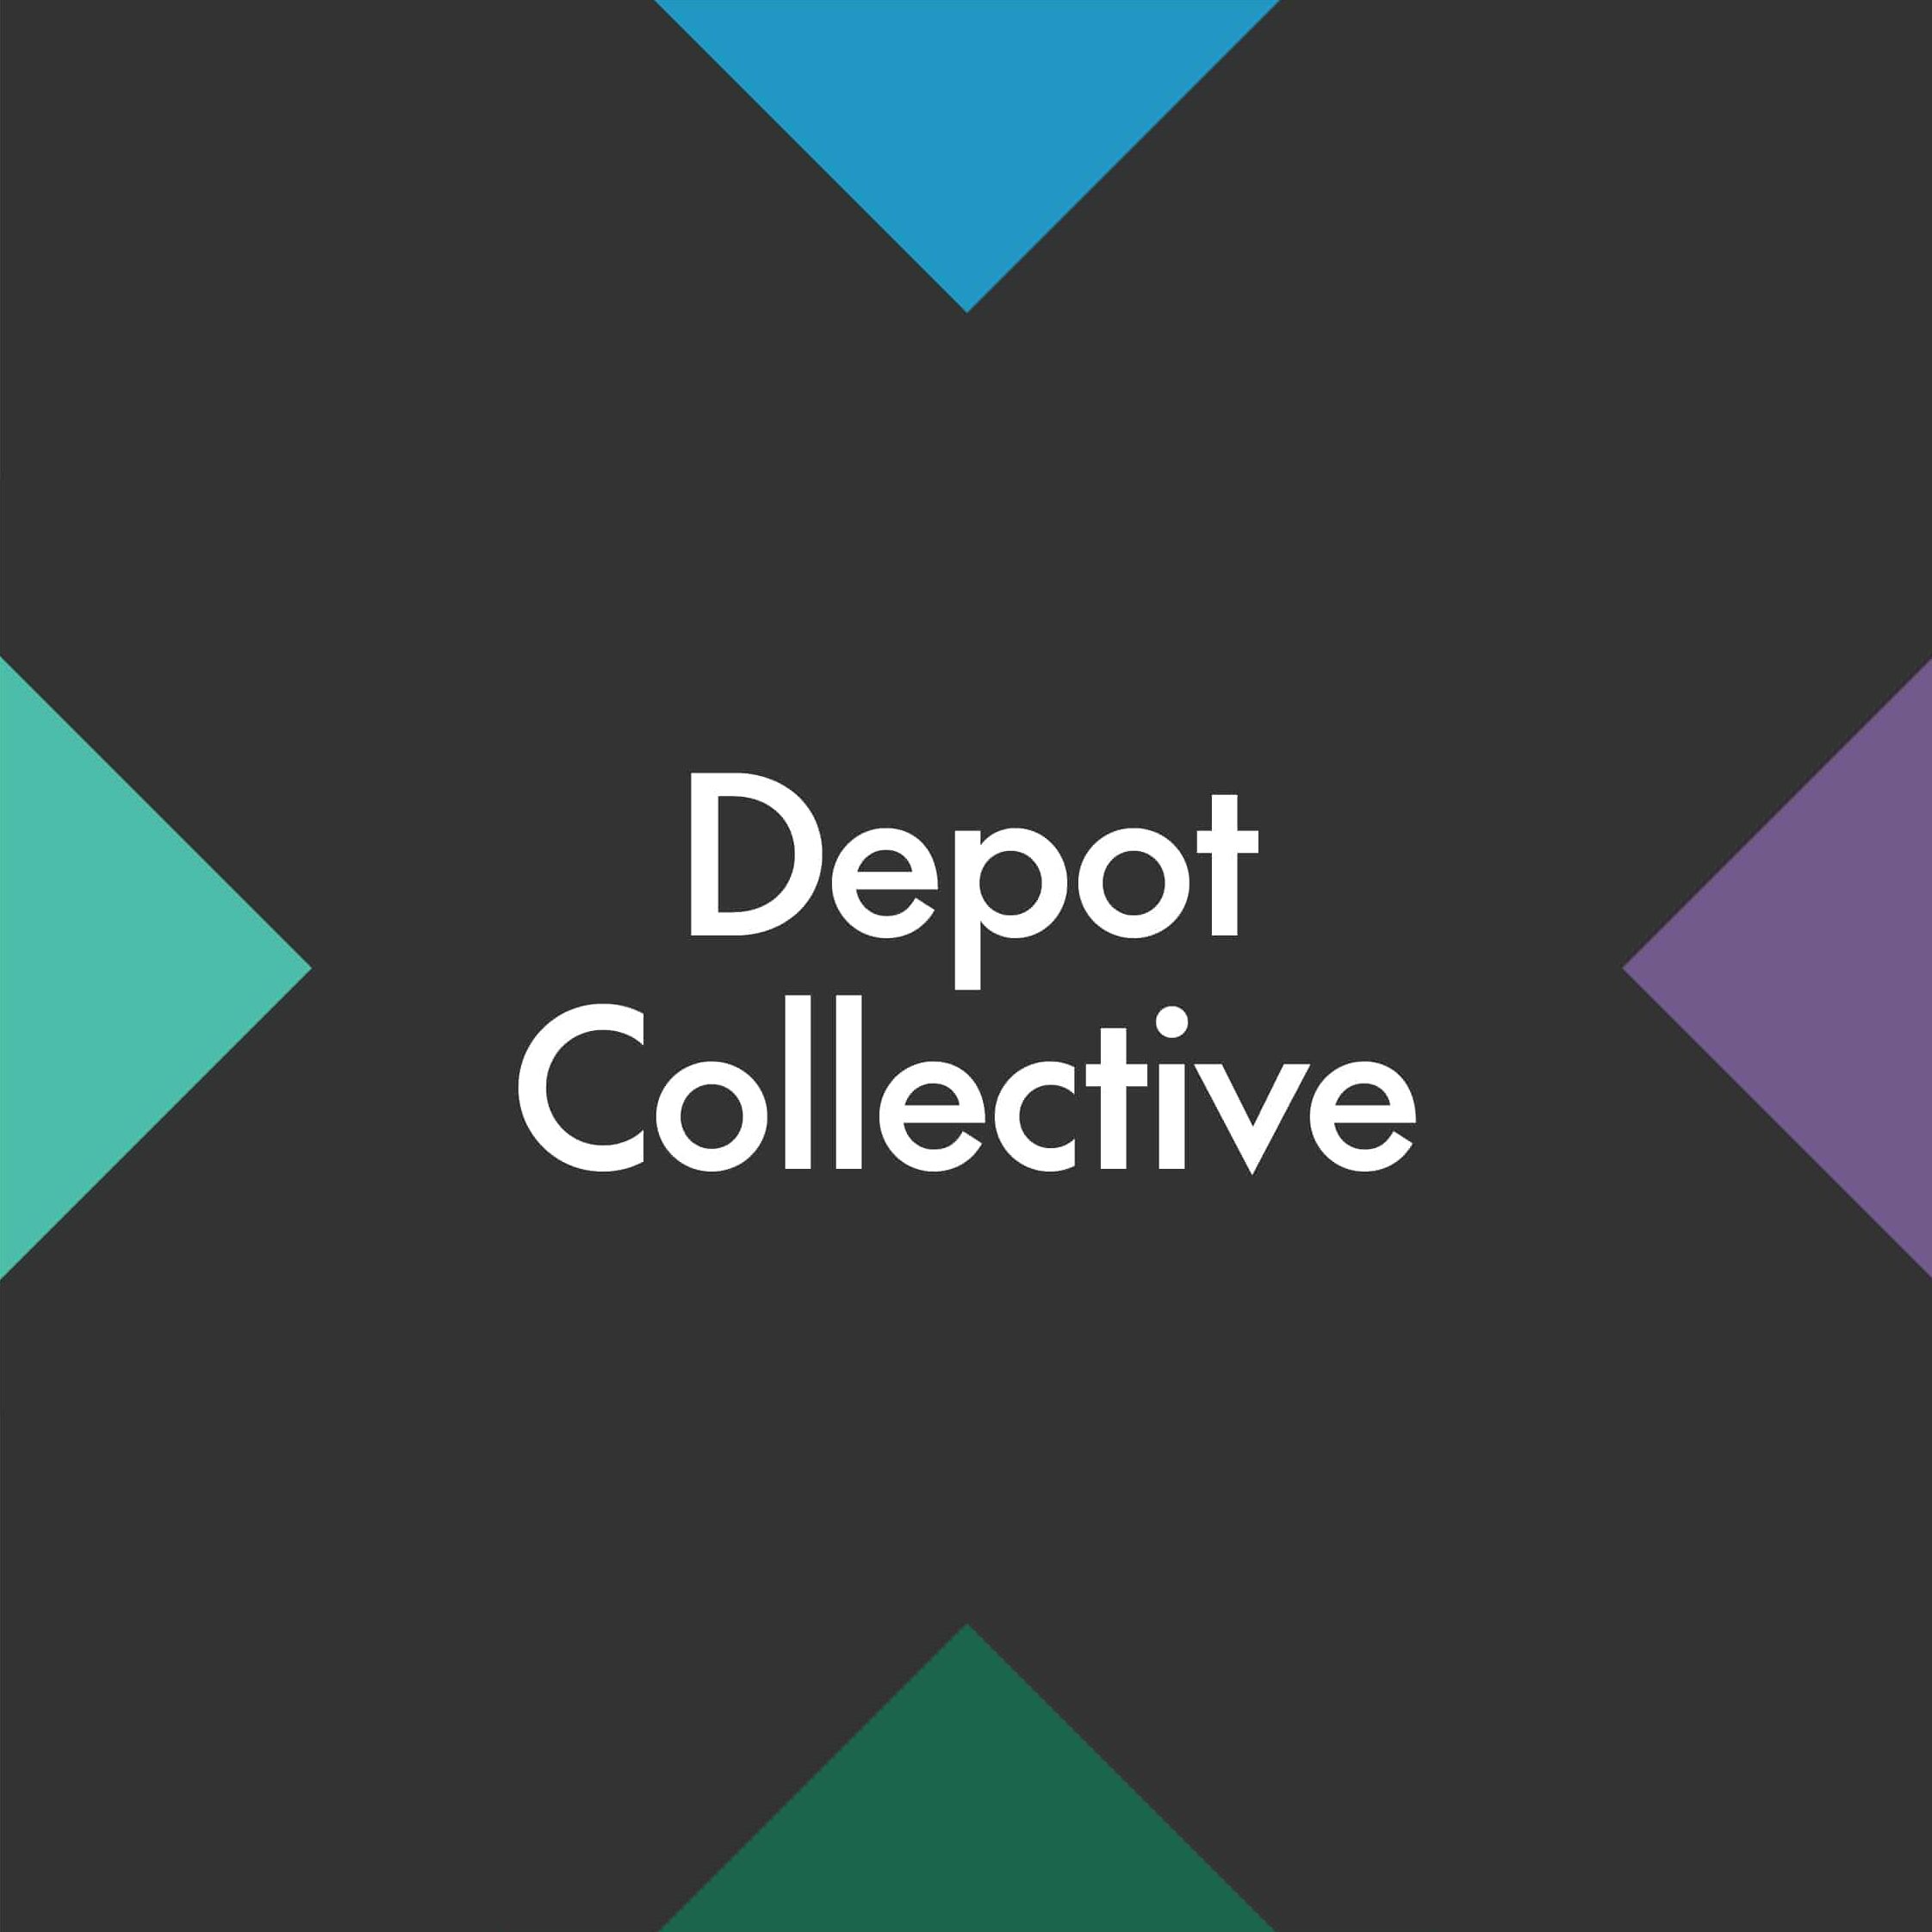 Logo tile for the DEPOT Collective Membership Programme.